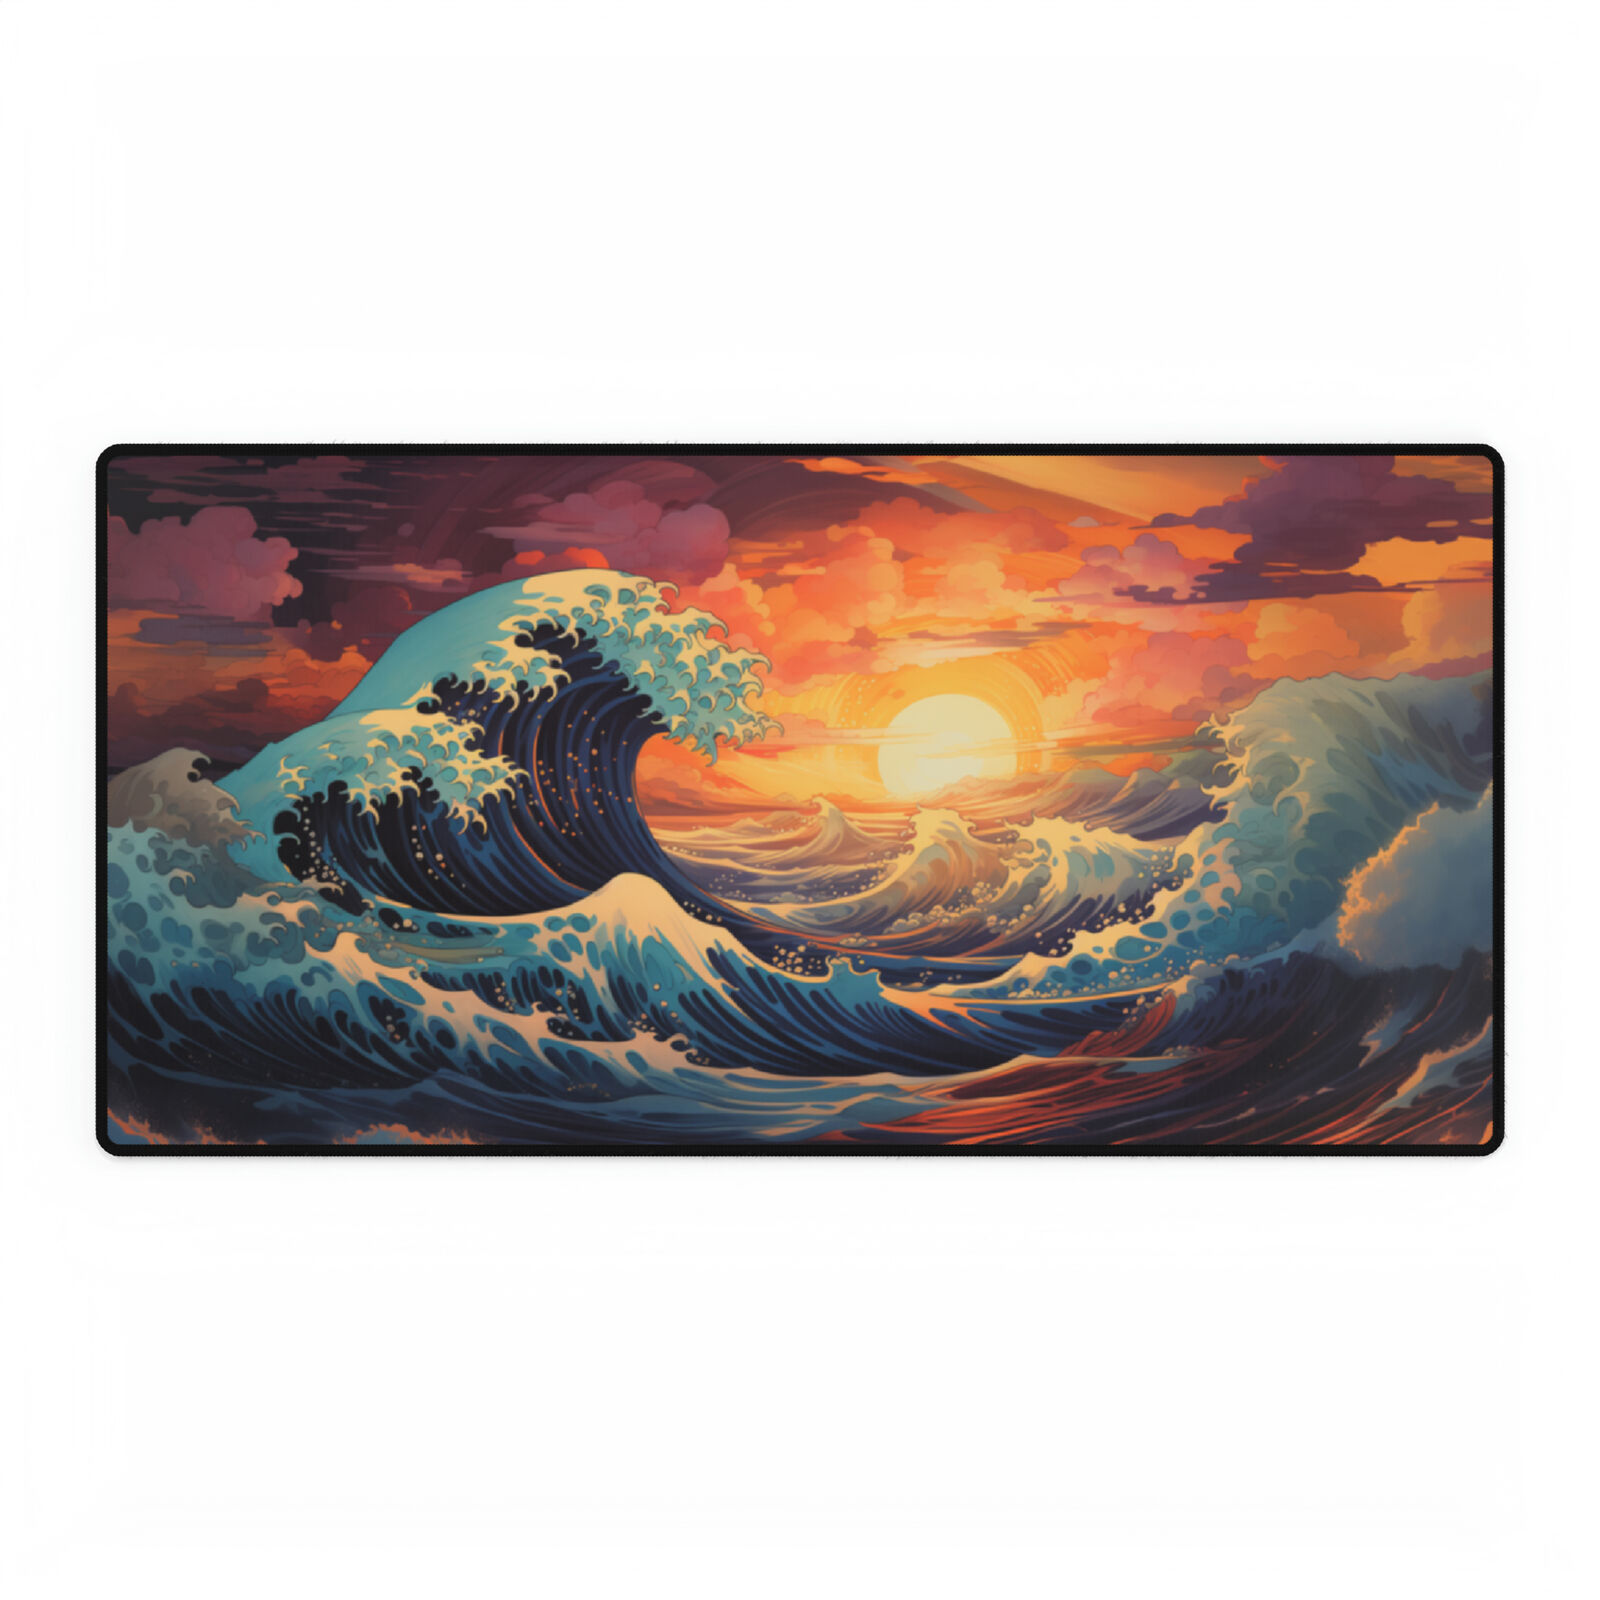 Ocean Sea Surfing WAVES at Sunset Japanese Anime Desk Mat Mouse Pad Office Decor